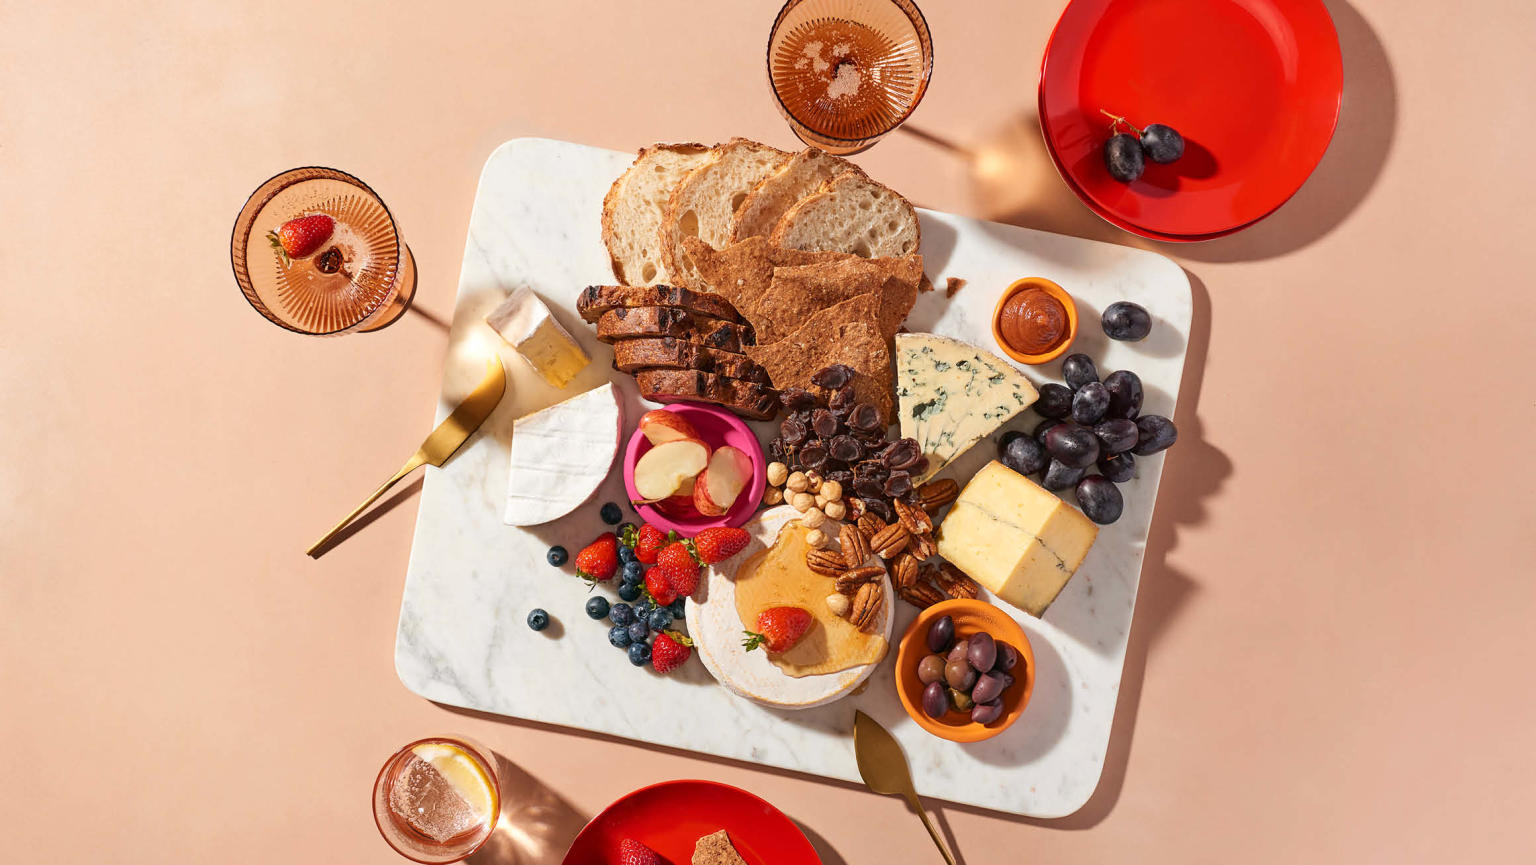 A appetising display of assorted breads, cheeses, nuts, and fruits elegantly arranged on a marble platter atop a peach table. The image also includes two vibrant red plates, two champagne coupes, a tall glass and gold cutlery.